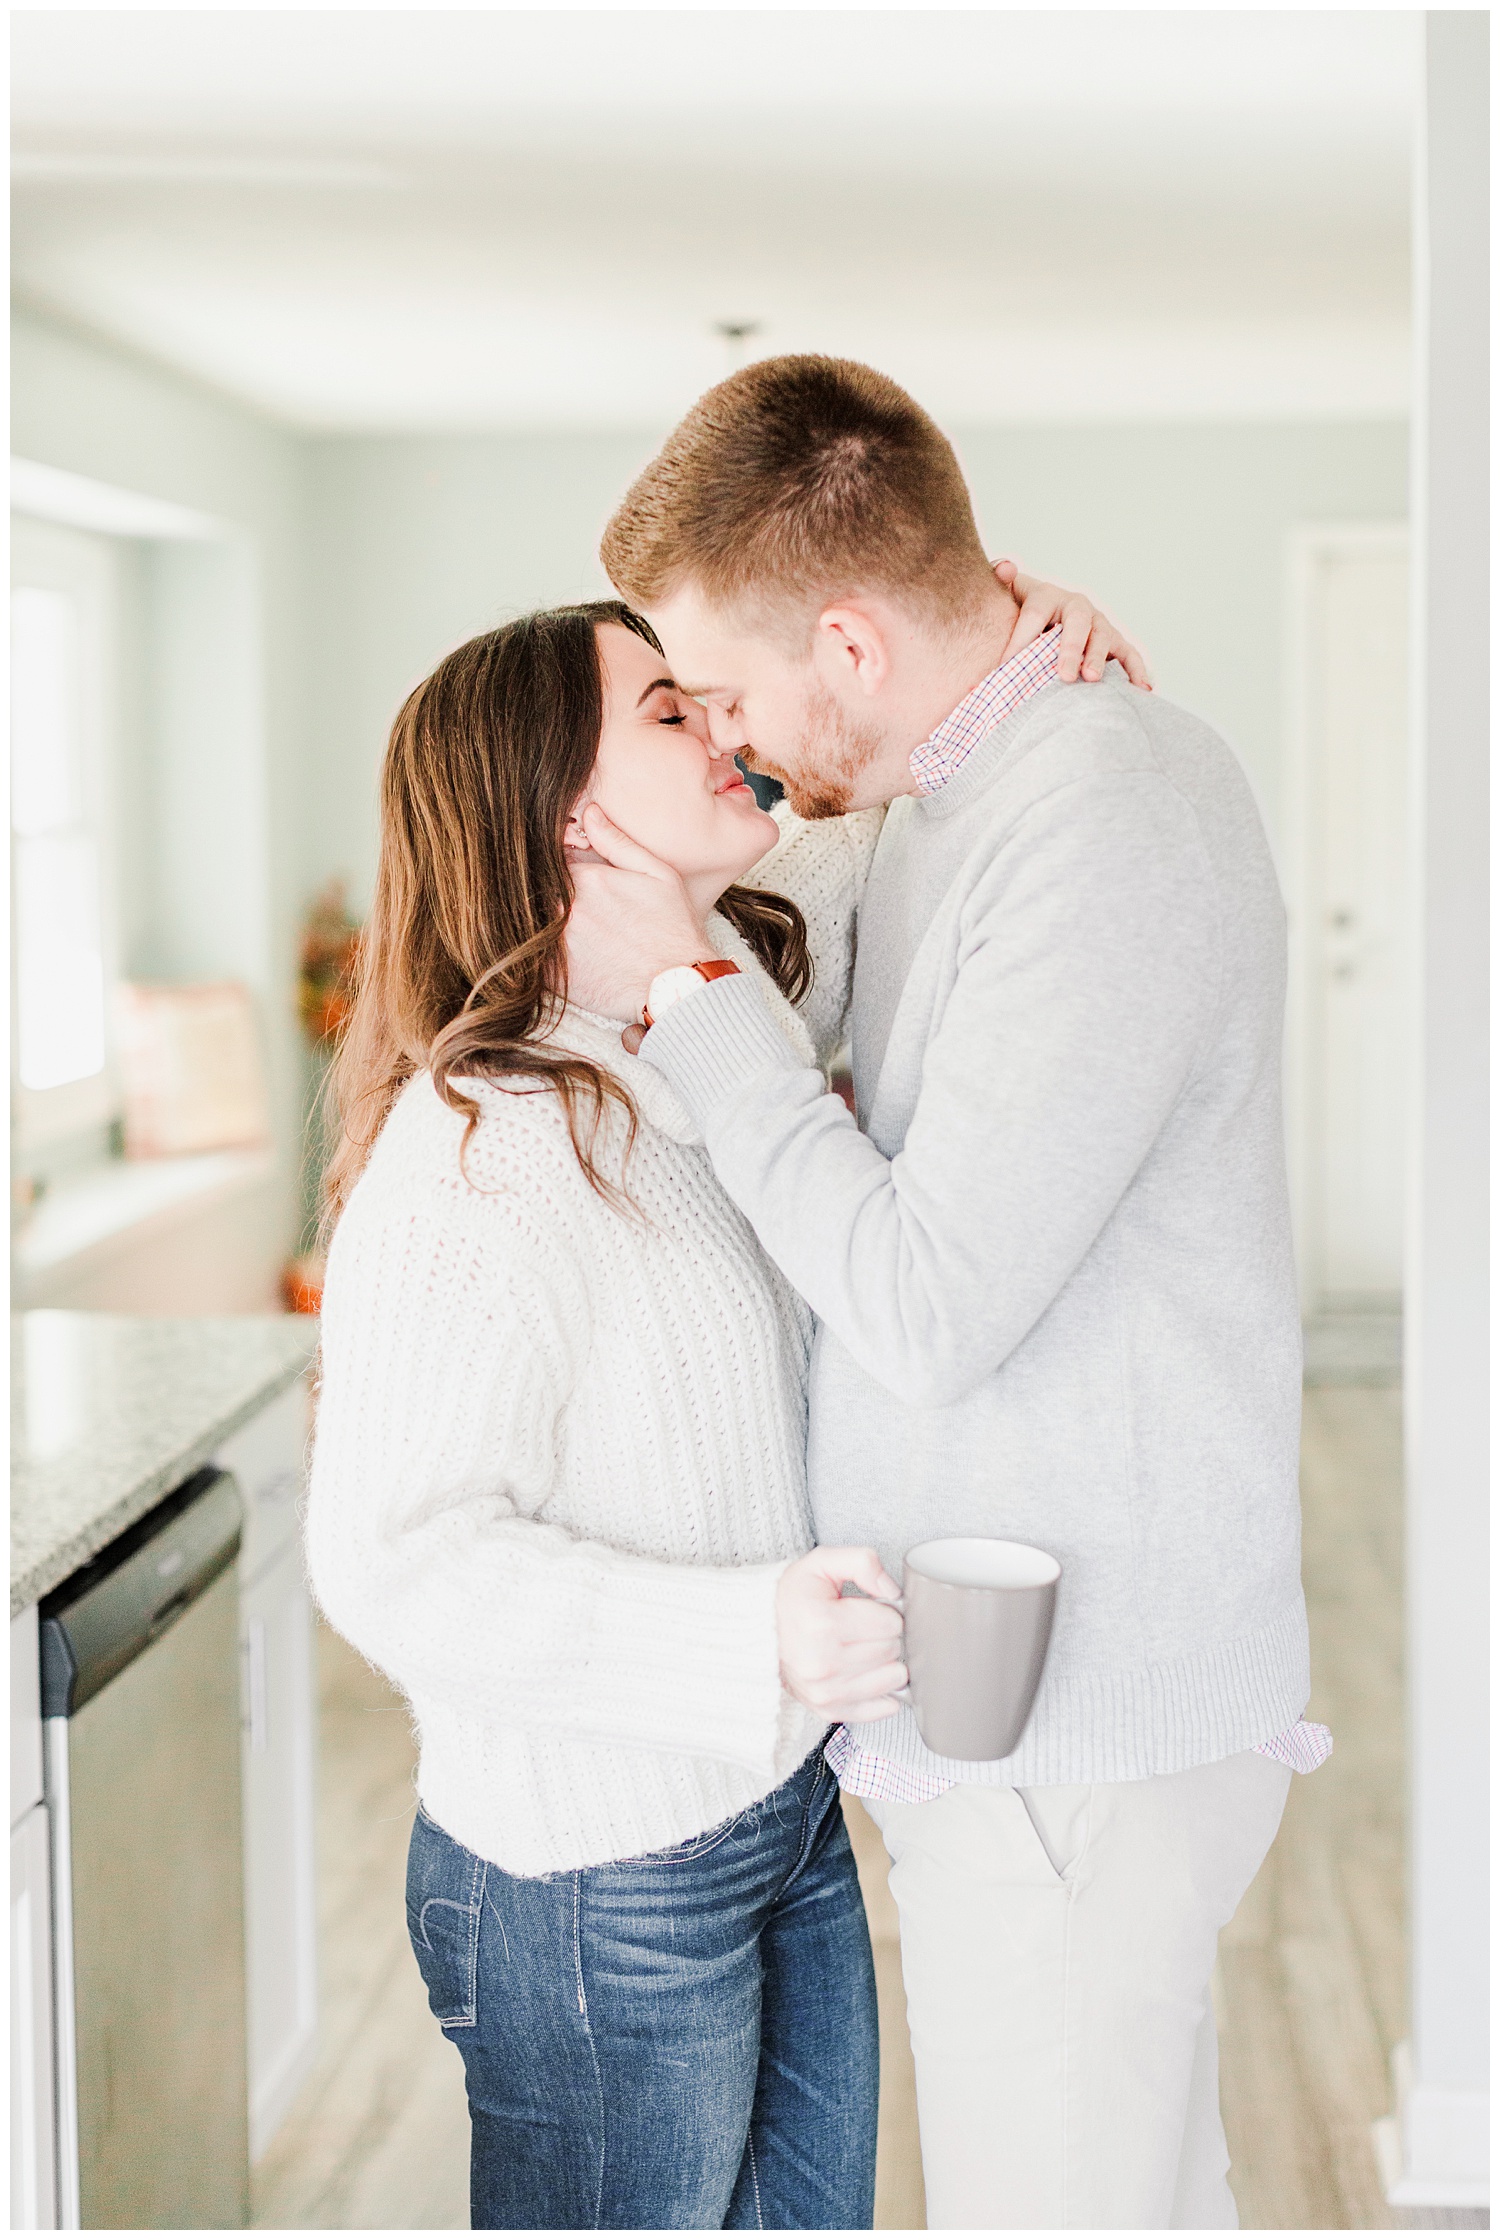 Dustin kisses Jenna while holding a cup of coffee | Cozy Kitchen Engagement Session | CB Studio